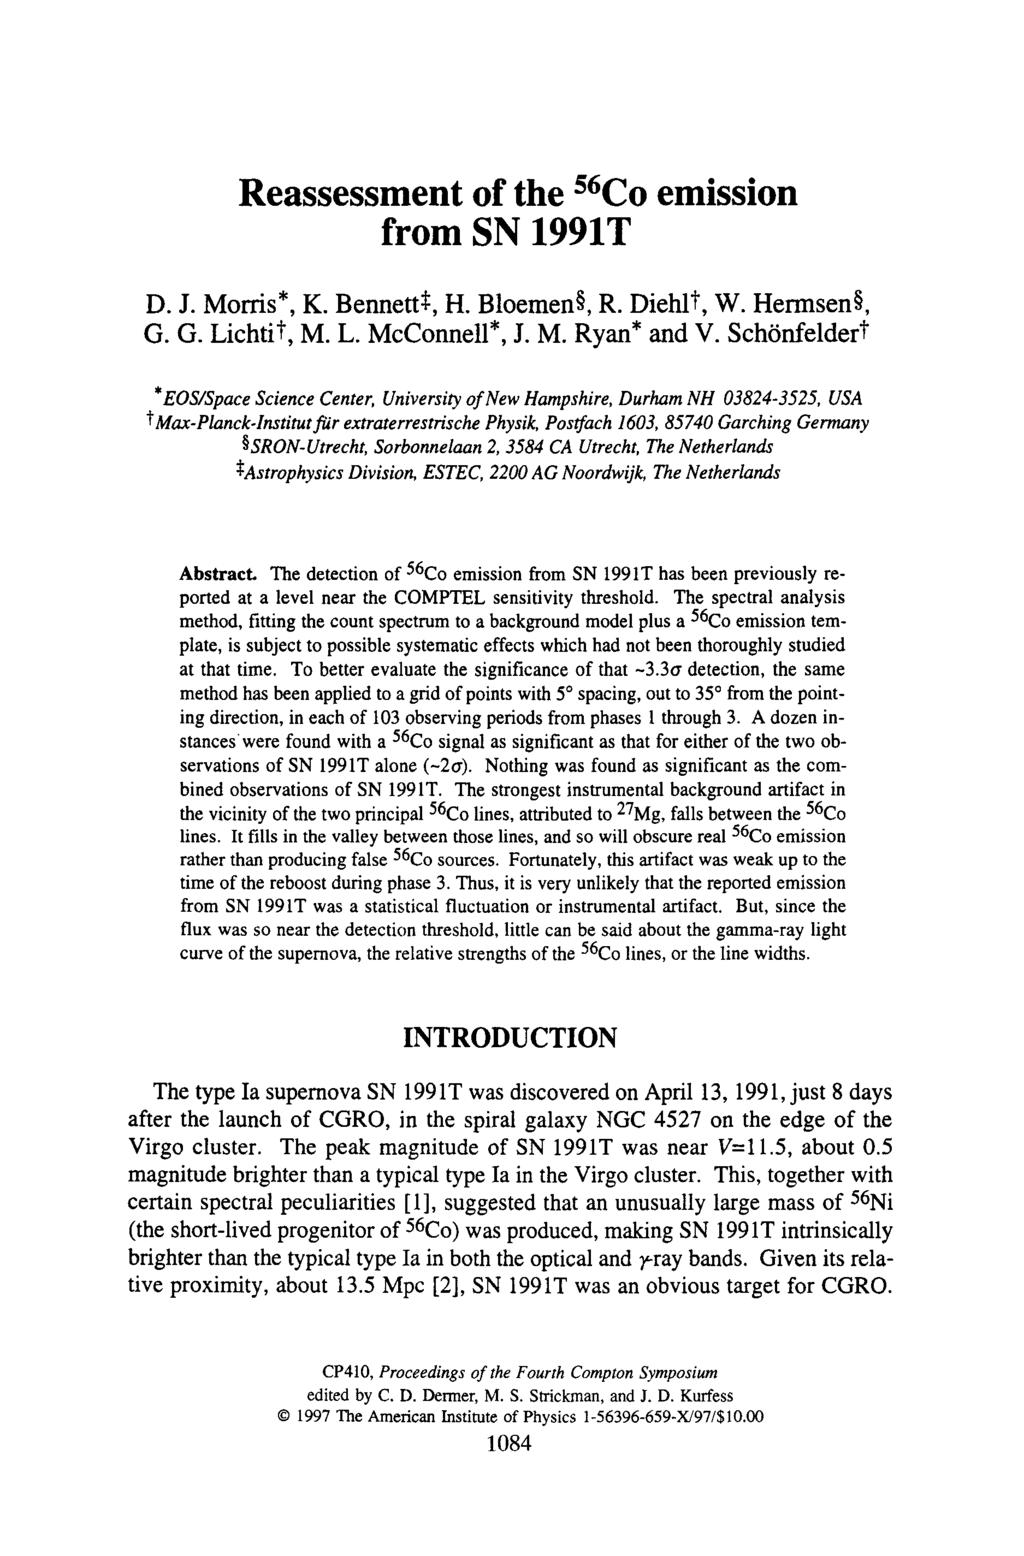 Reassessment of the 56Co emission from SN 1991T D. J. Morris*, K. Bennett*, H. Bloemenw R. Diehlt, W. Hermsenw G. G. Lichtit, M. L. McConnell*, J. M. Ryan* and V.